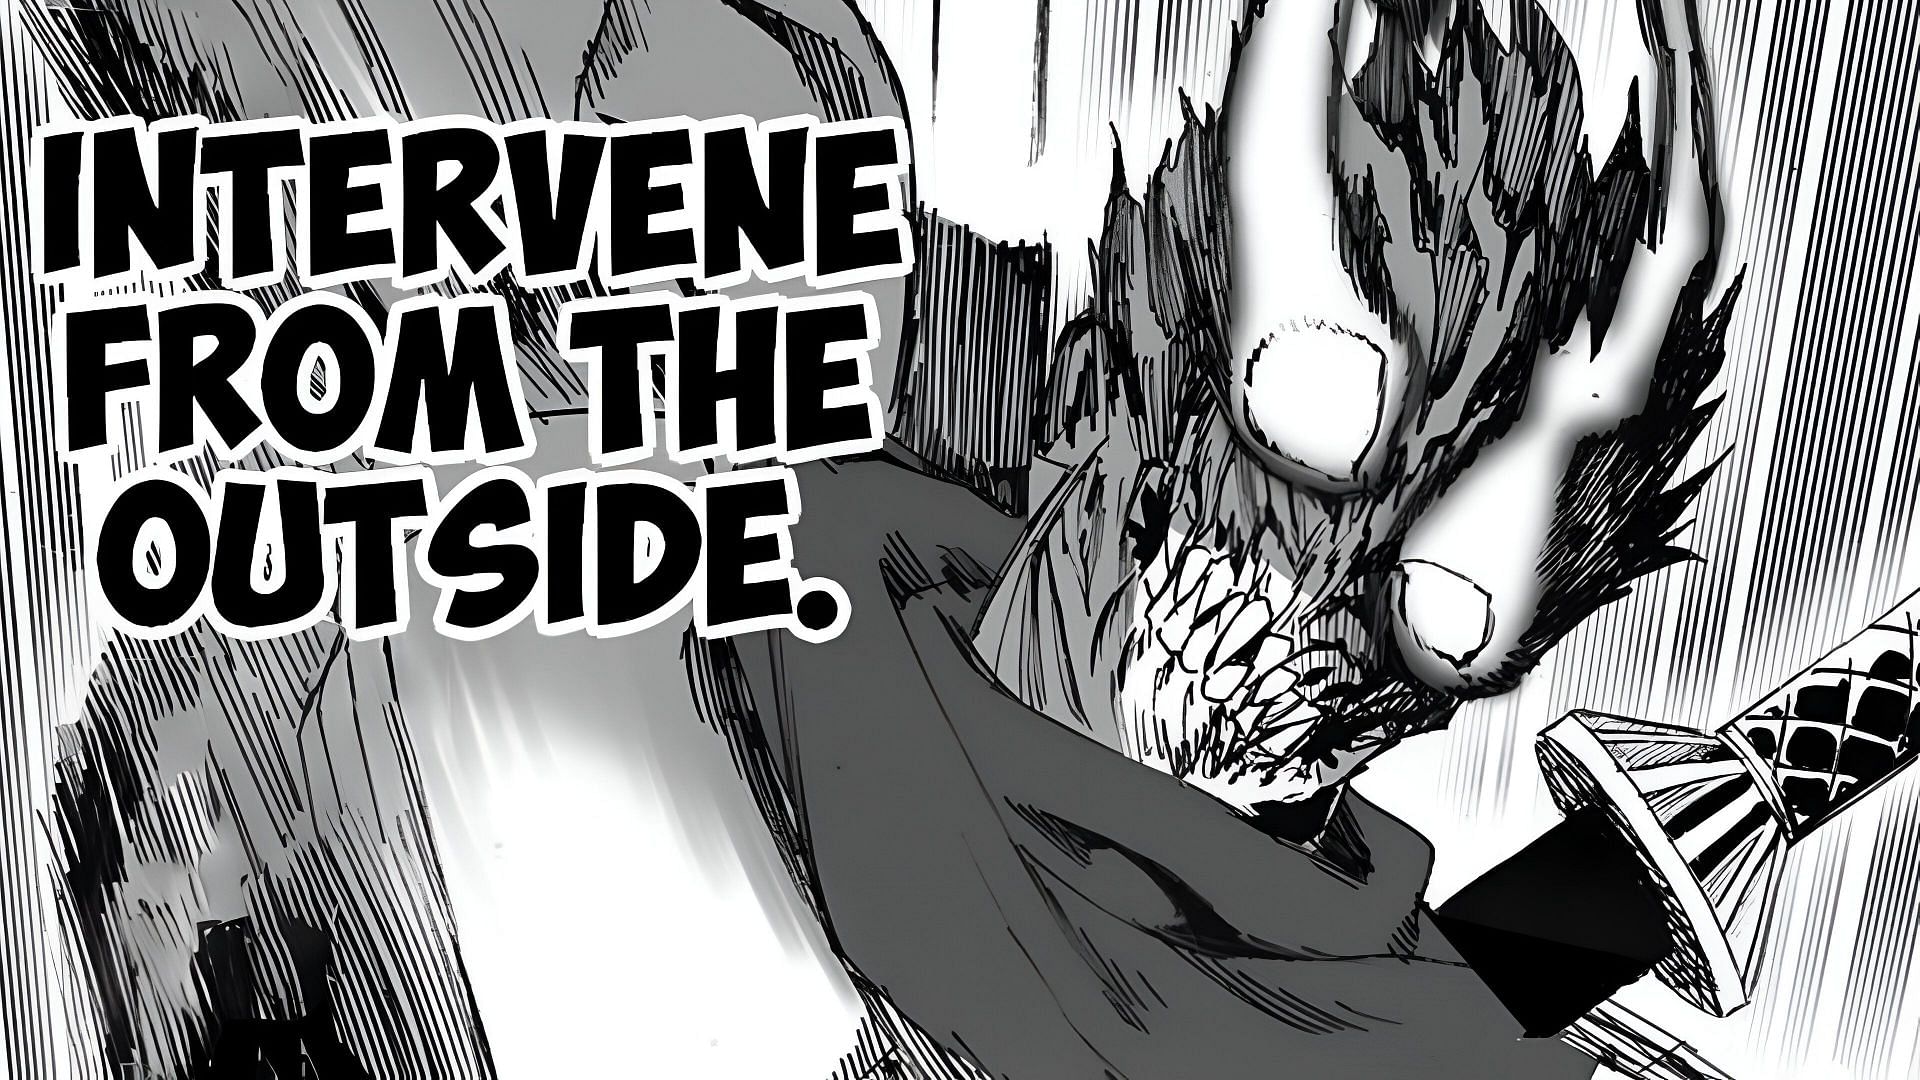 Empty Void using his Dimension Slash in One Punch Man Chapter 201 (Image via Shueisha)